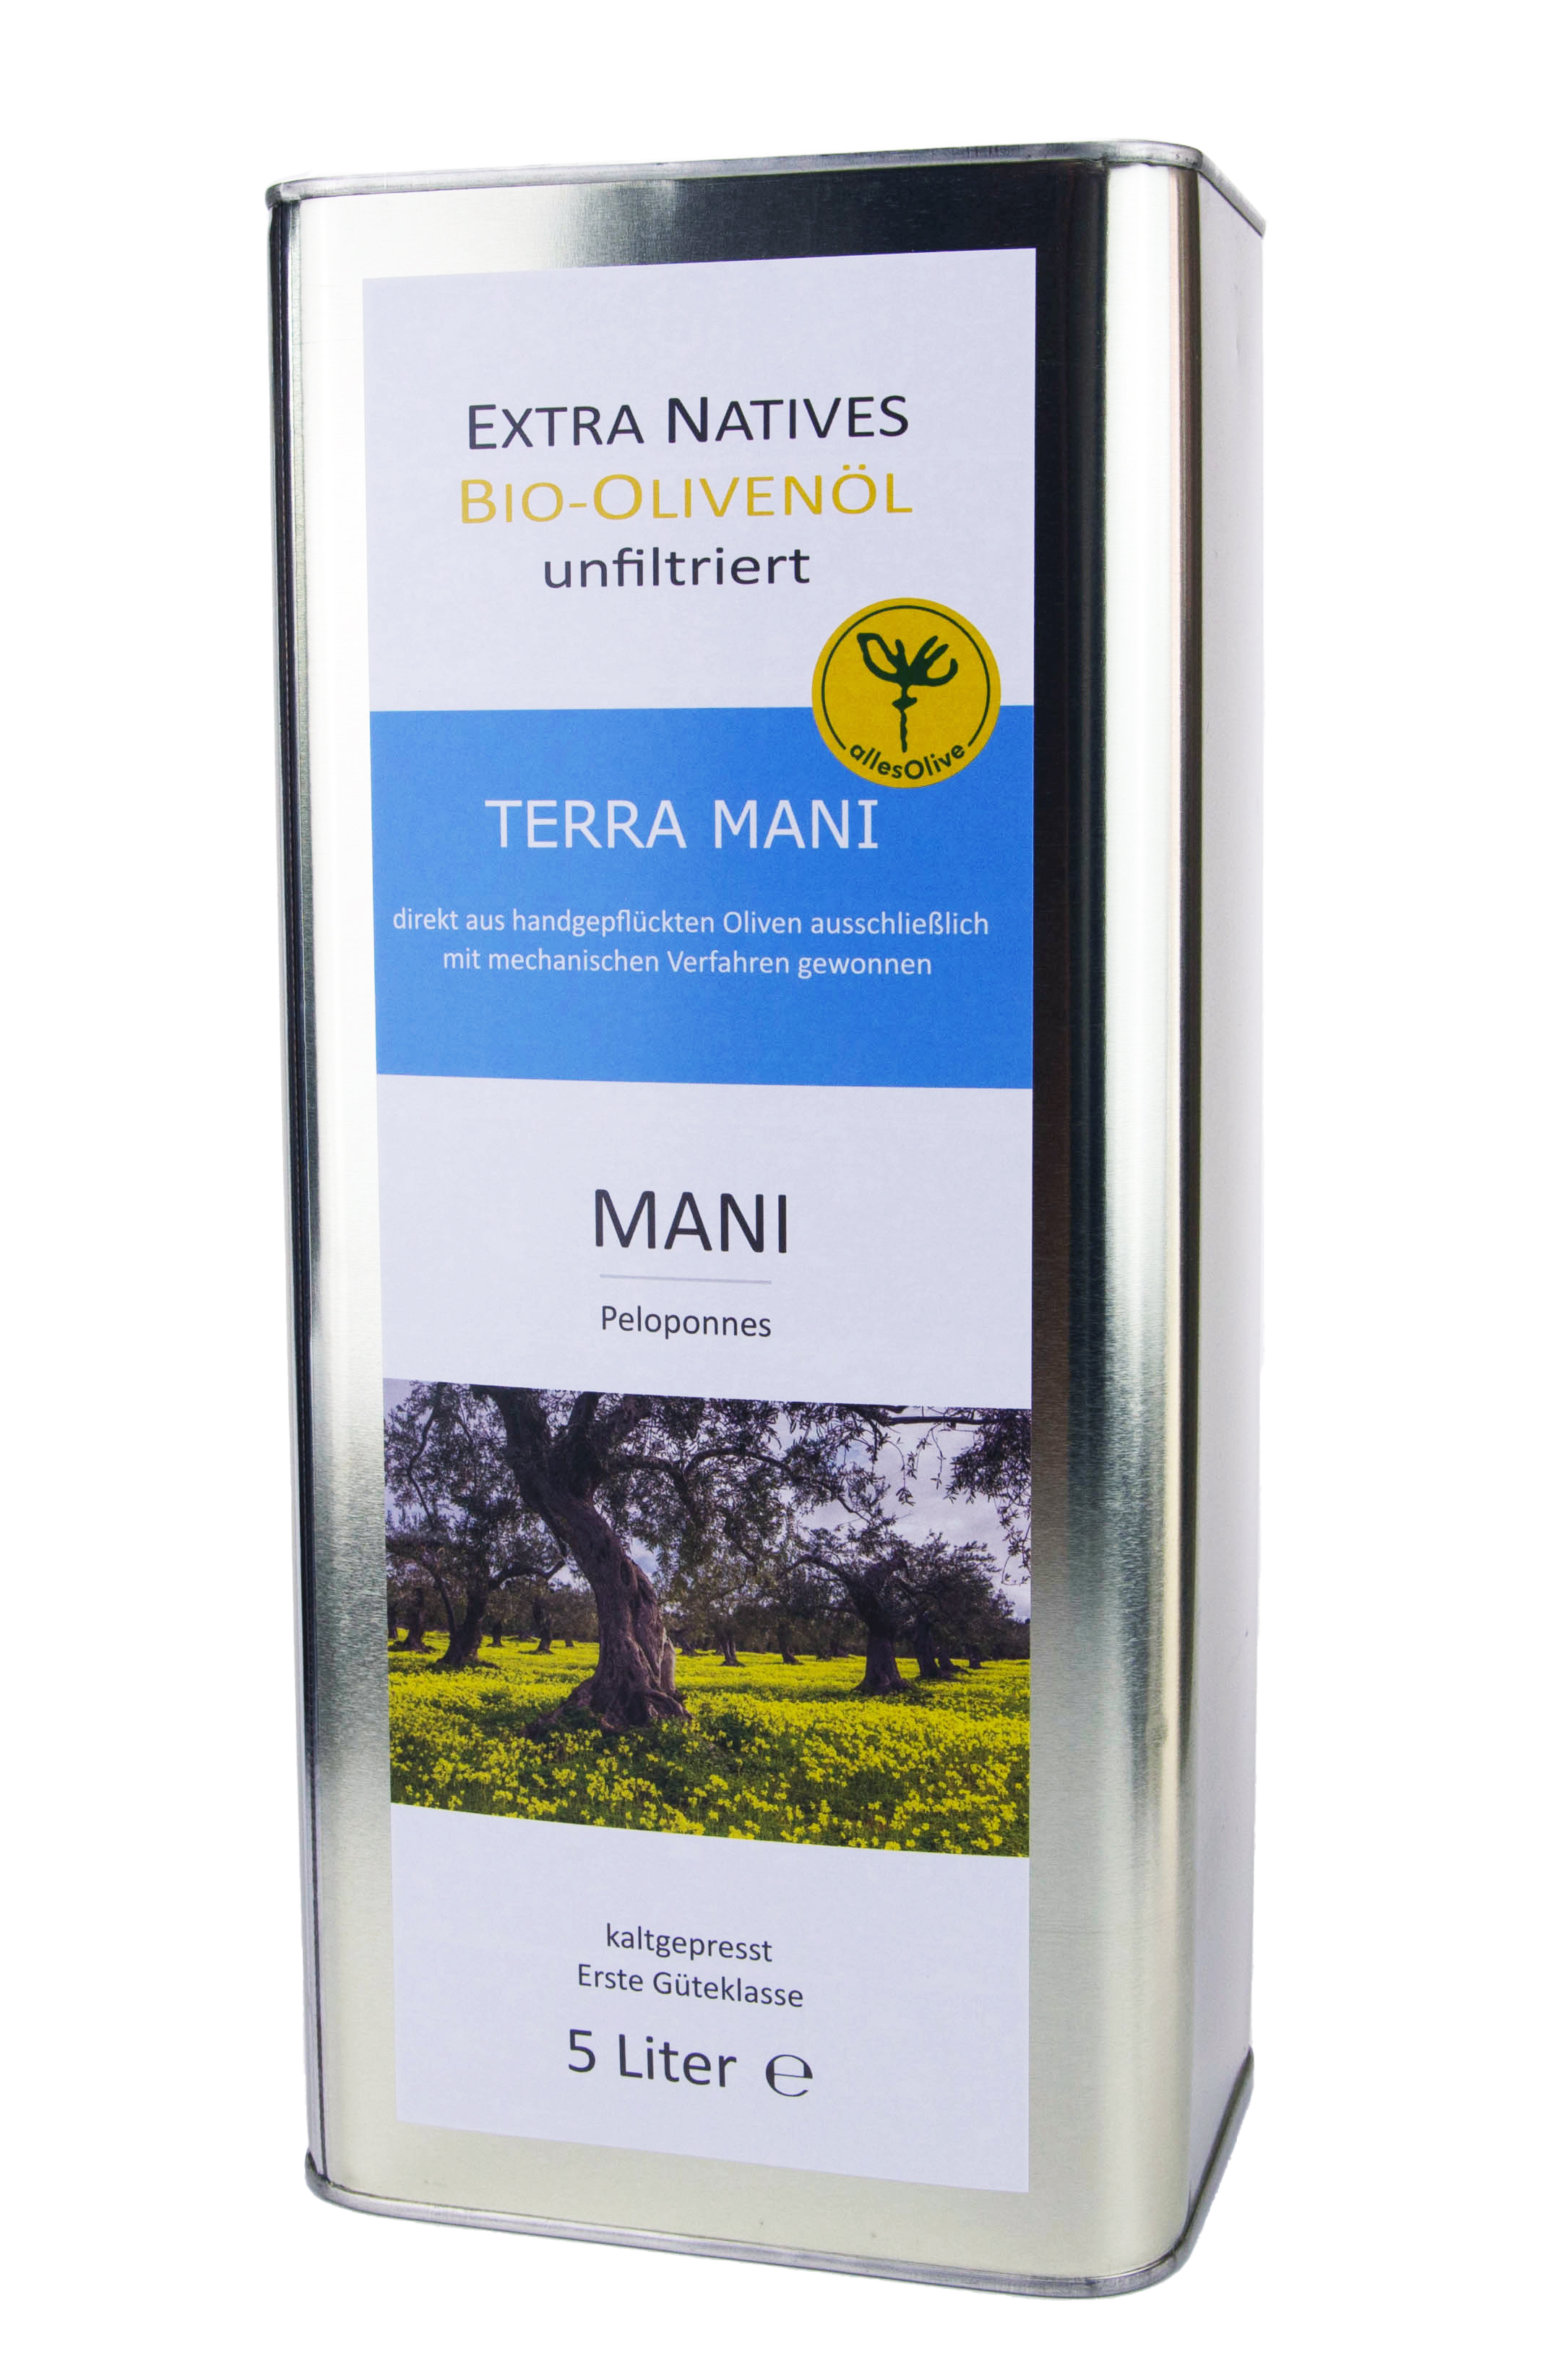 TERRA-MANI Native Organic Extra Virgin Olive Oil, unfiltered, 5L - Canister